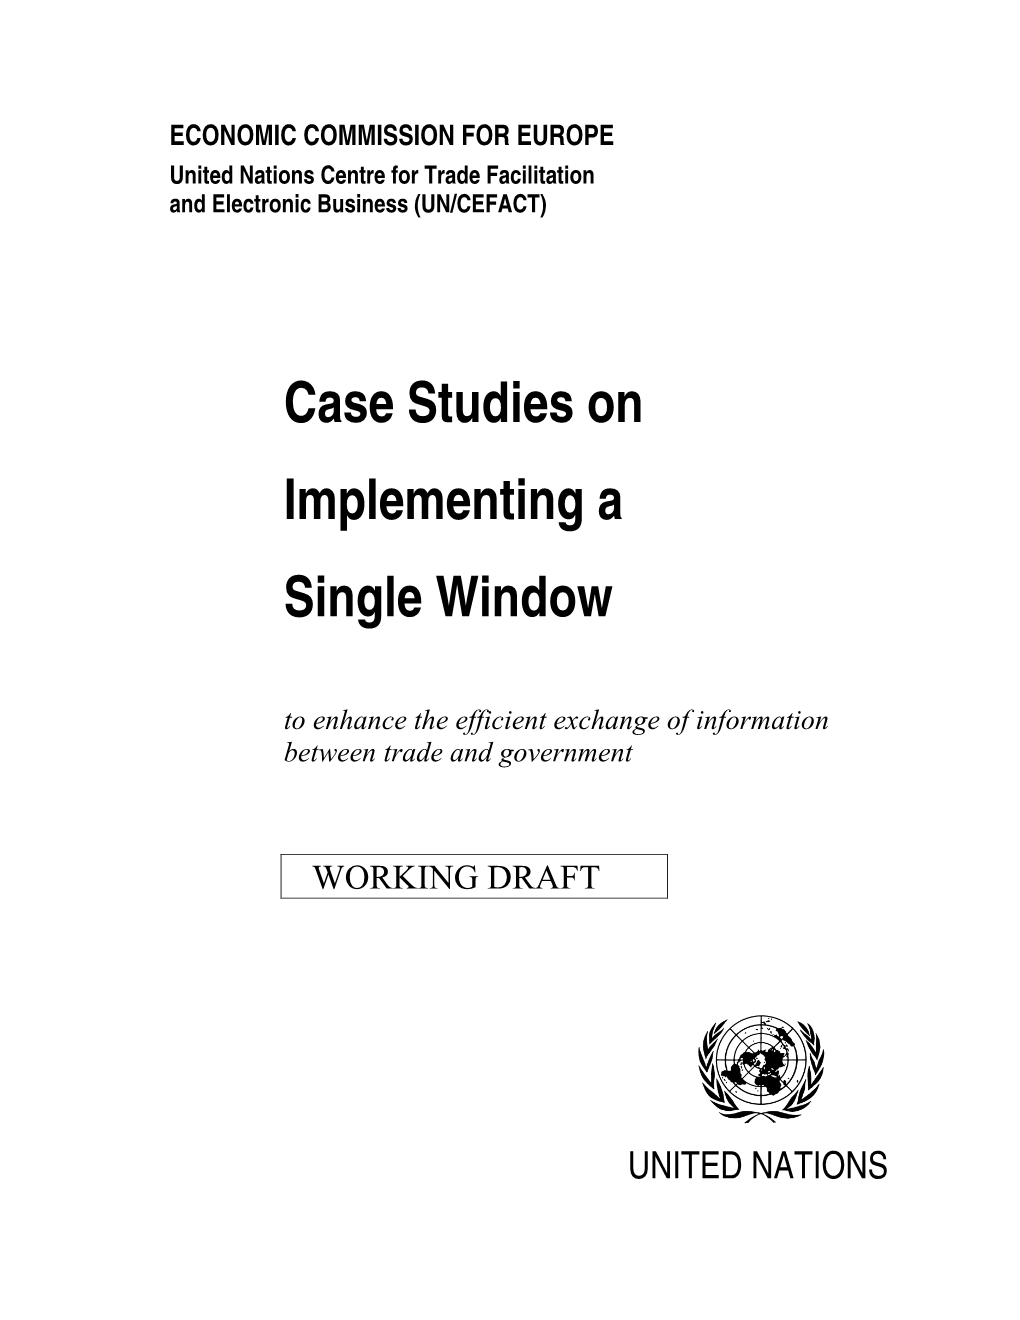 Case Studies on Implementing a Single Window